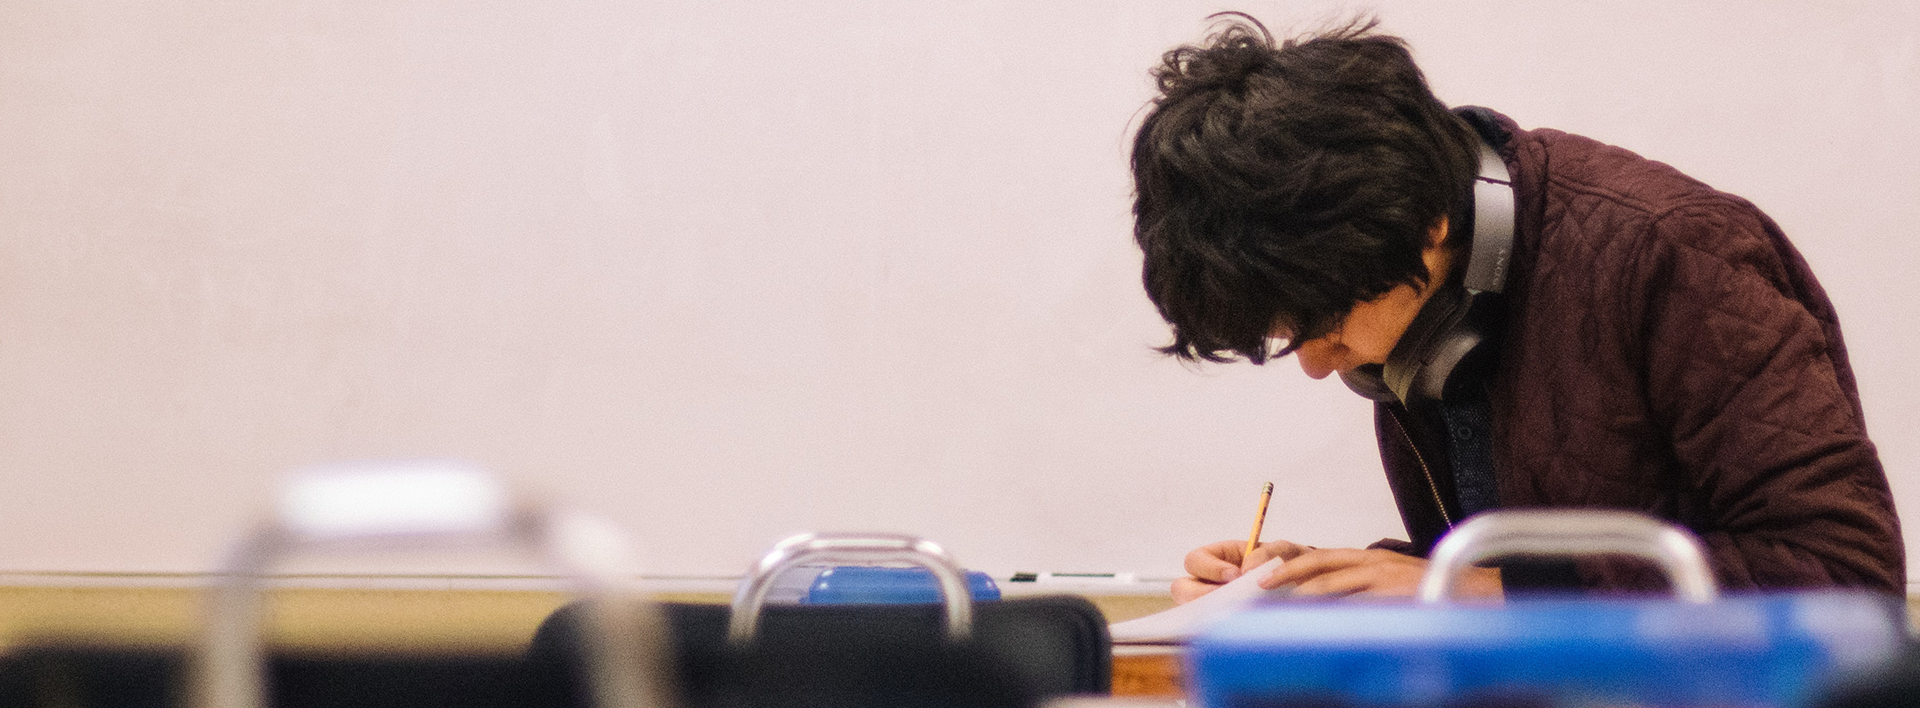 A student wearing a brown jacket sitting in a classroom writing.